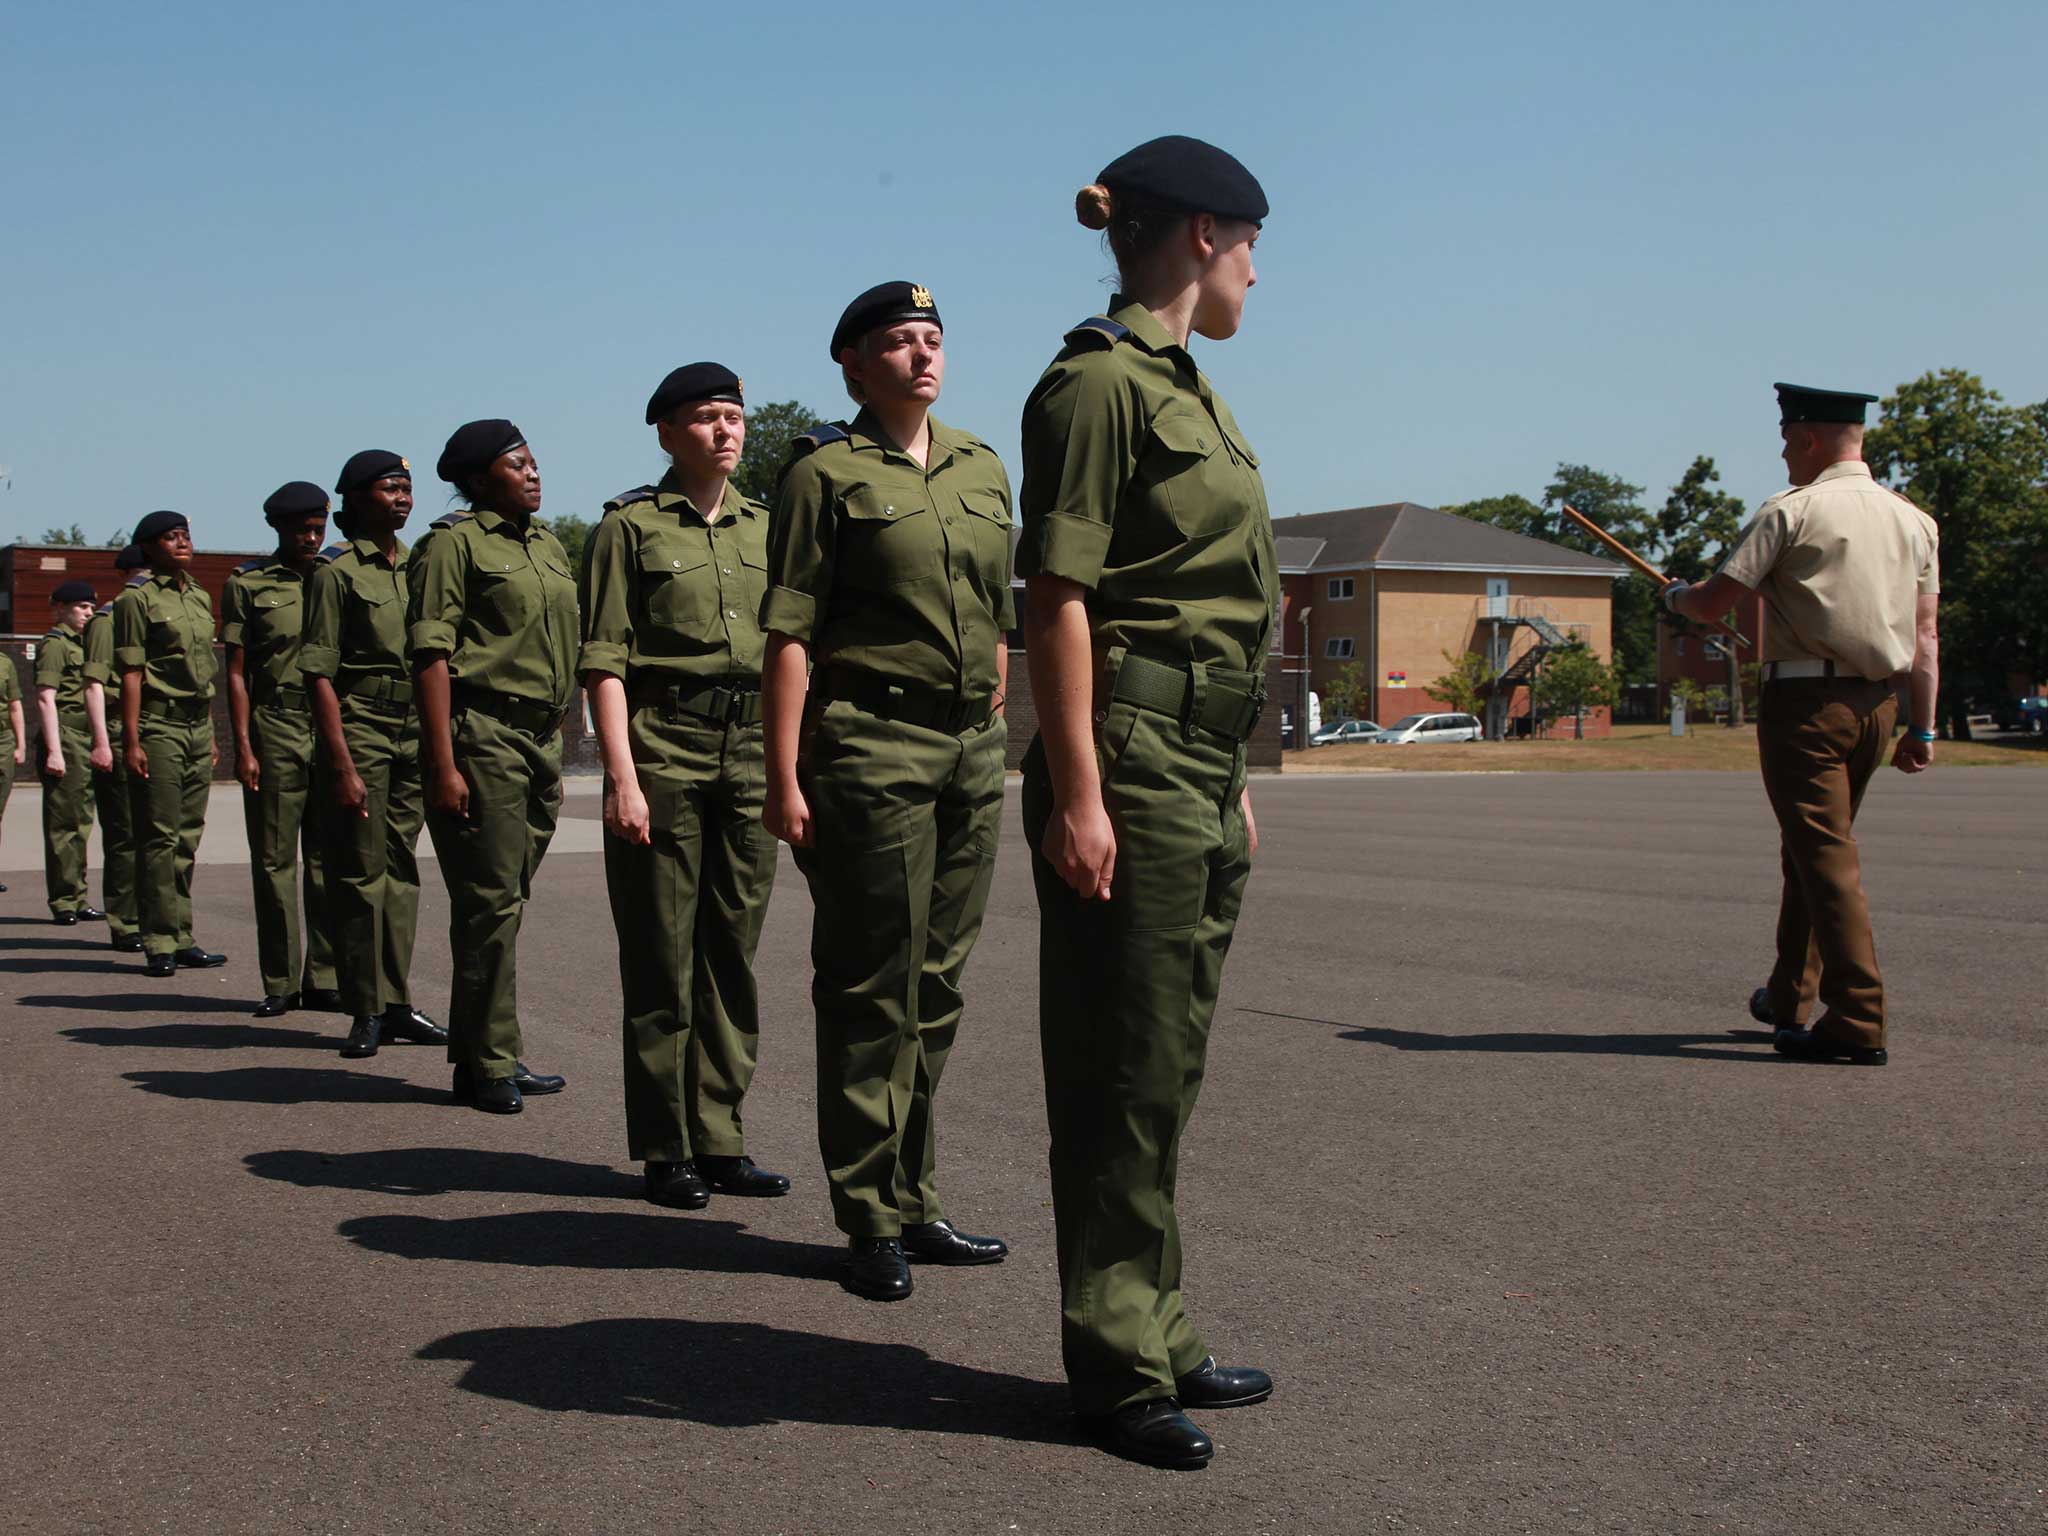 Female British Army recuits in the first stage of training